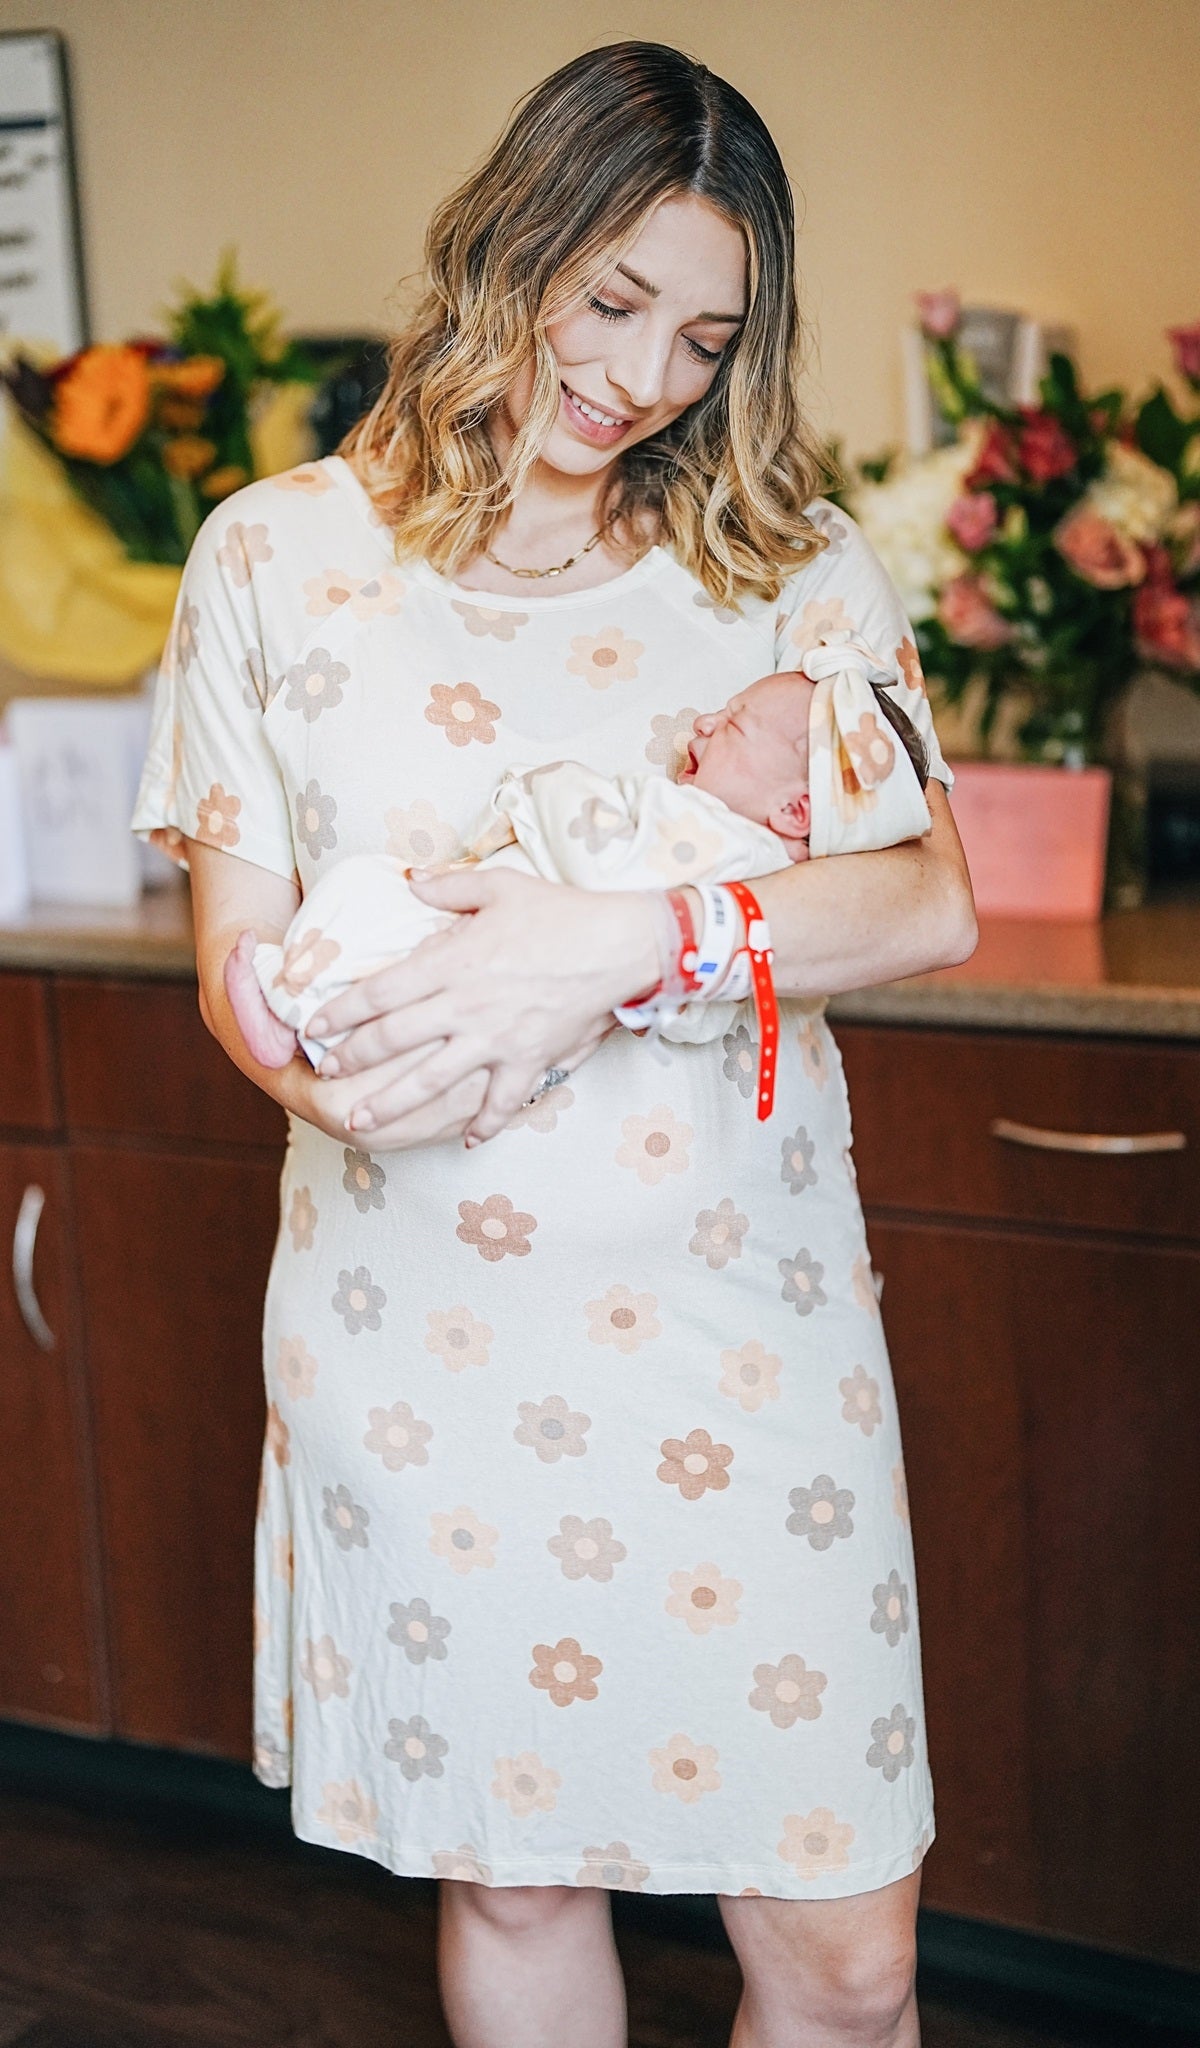 Daisies Rosa hospital gown worn by woman holding her newborn baby.